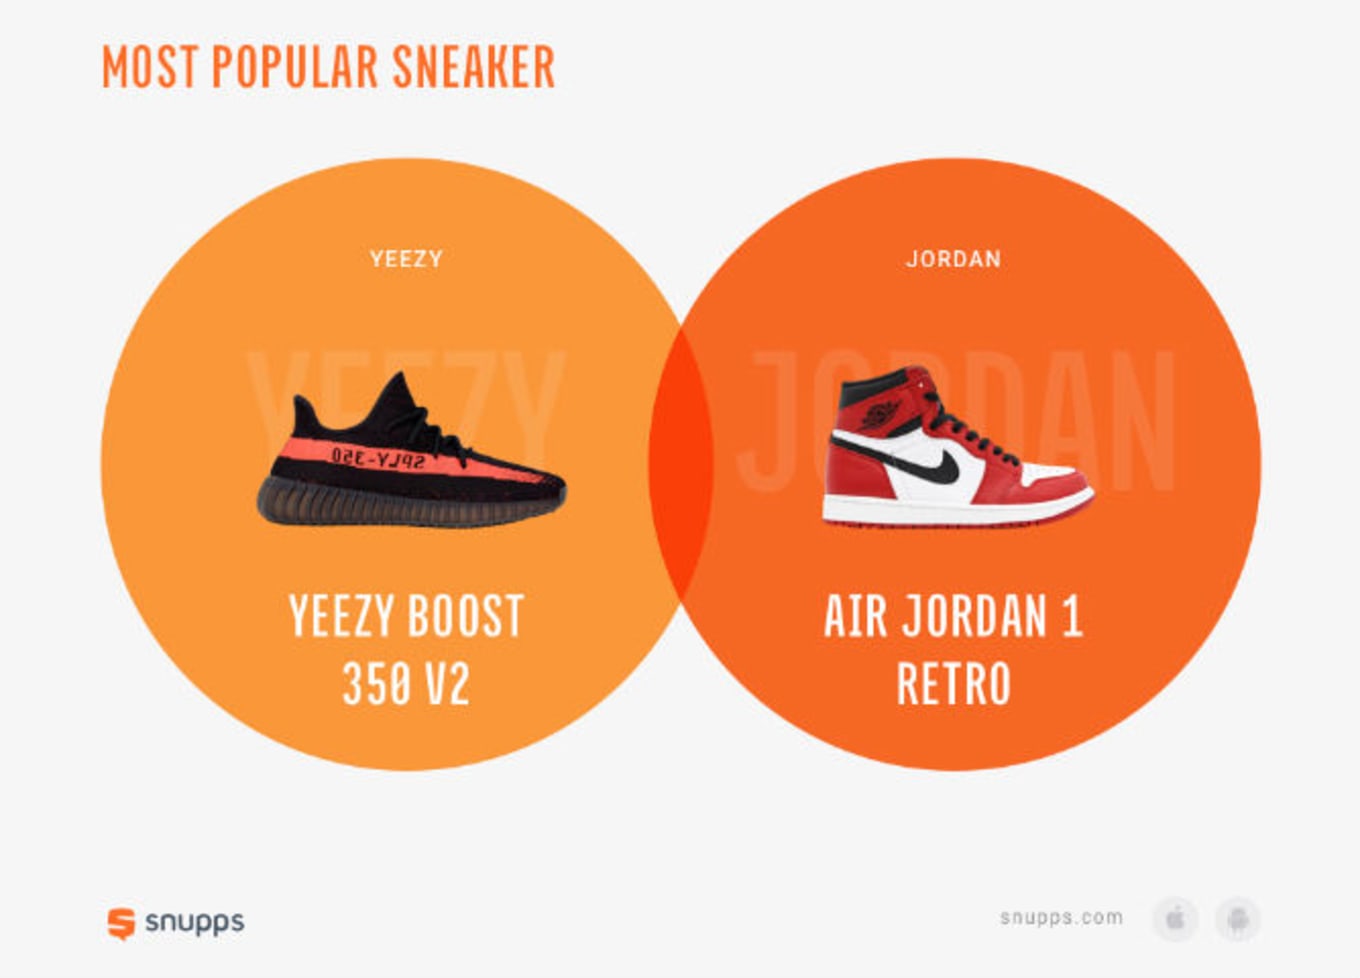 yeezy size compared to jordan